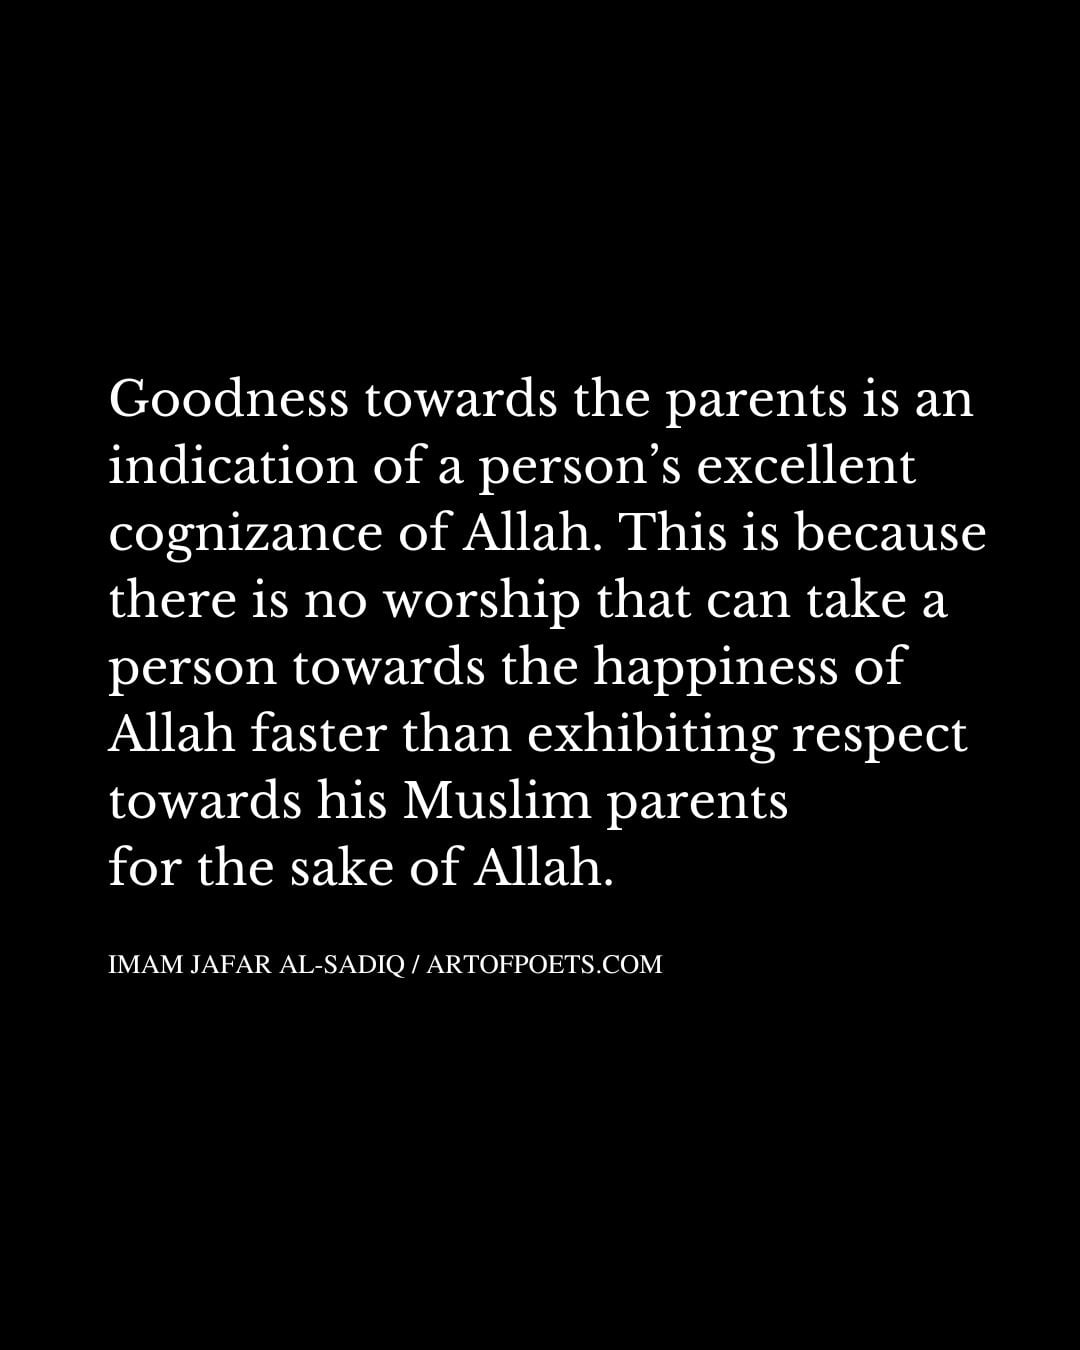 Goodness towards the parents is an indication of a persons excellent cognizance of Allah